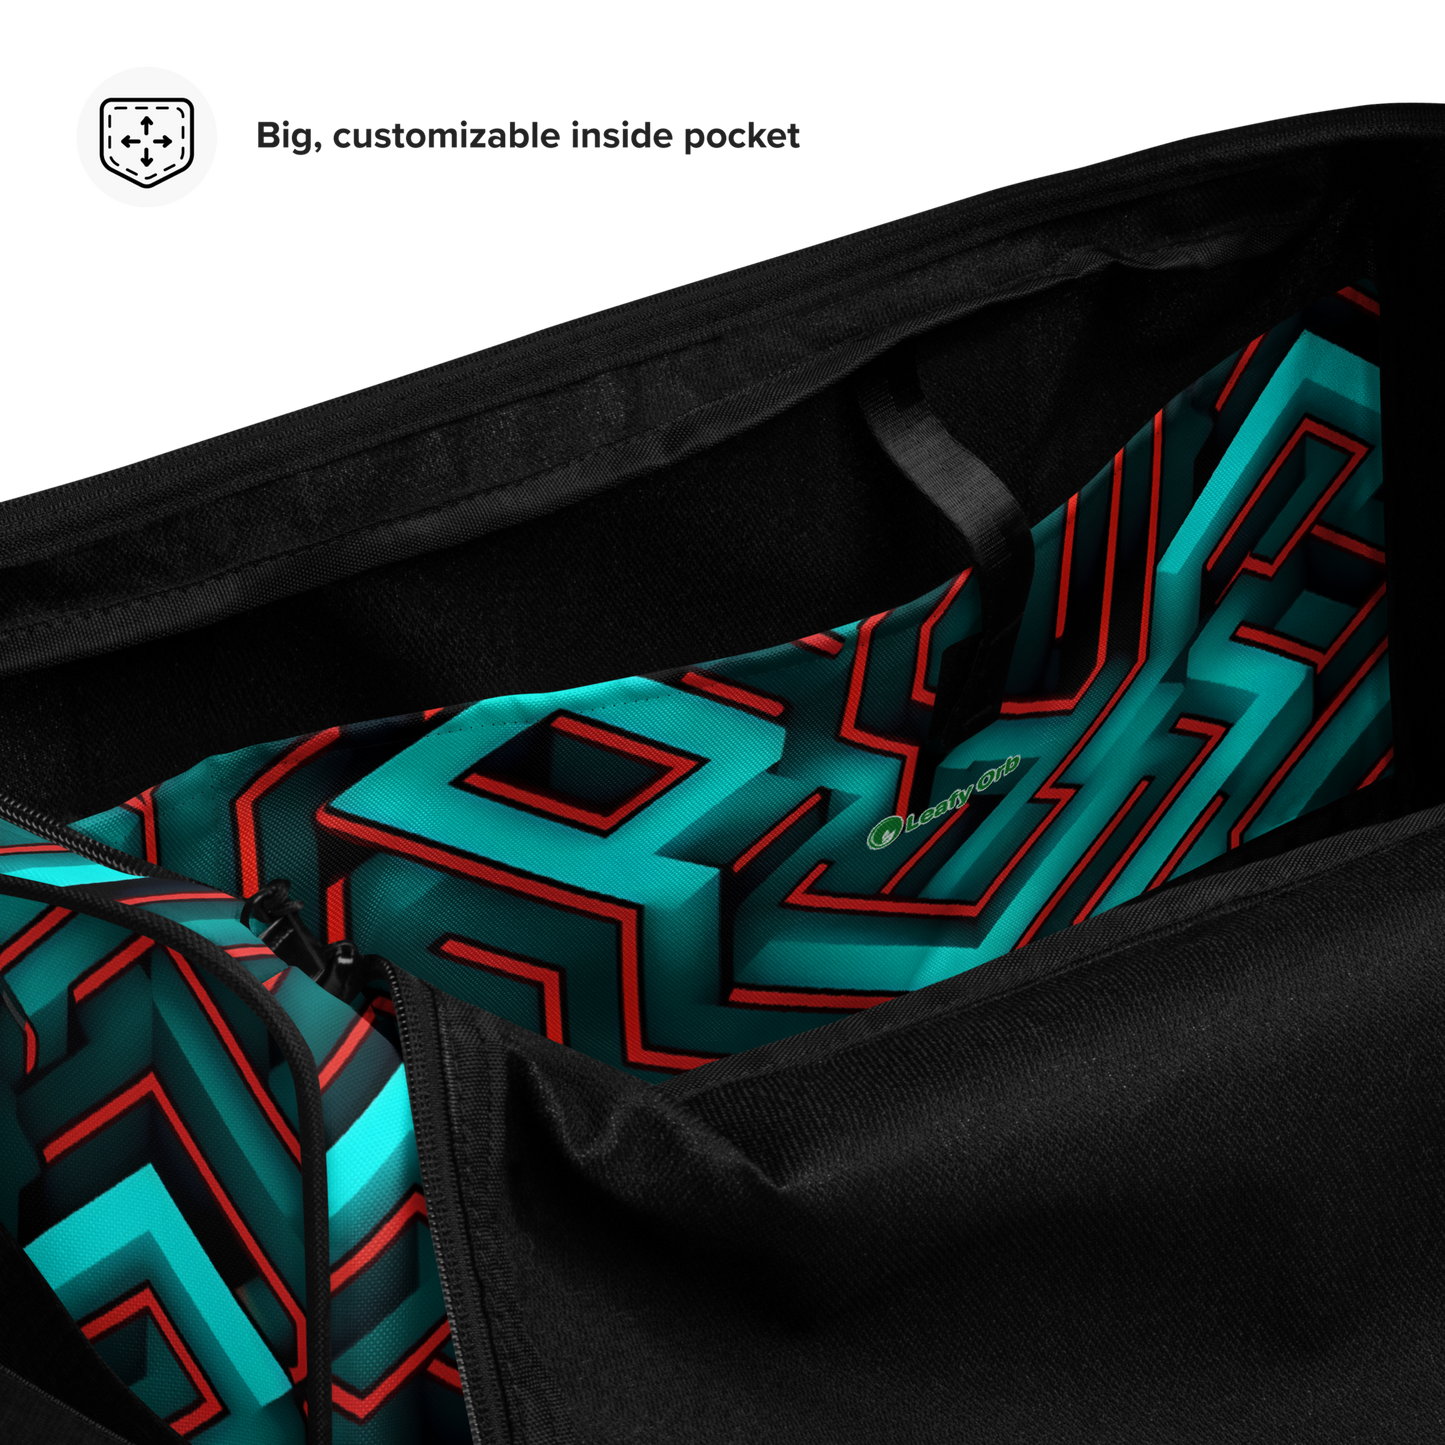 3D Maze Illusion | 3D Patterns | All-Over Print Duffle Bag - #2